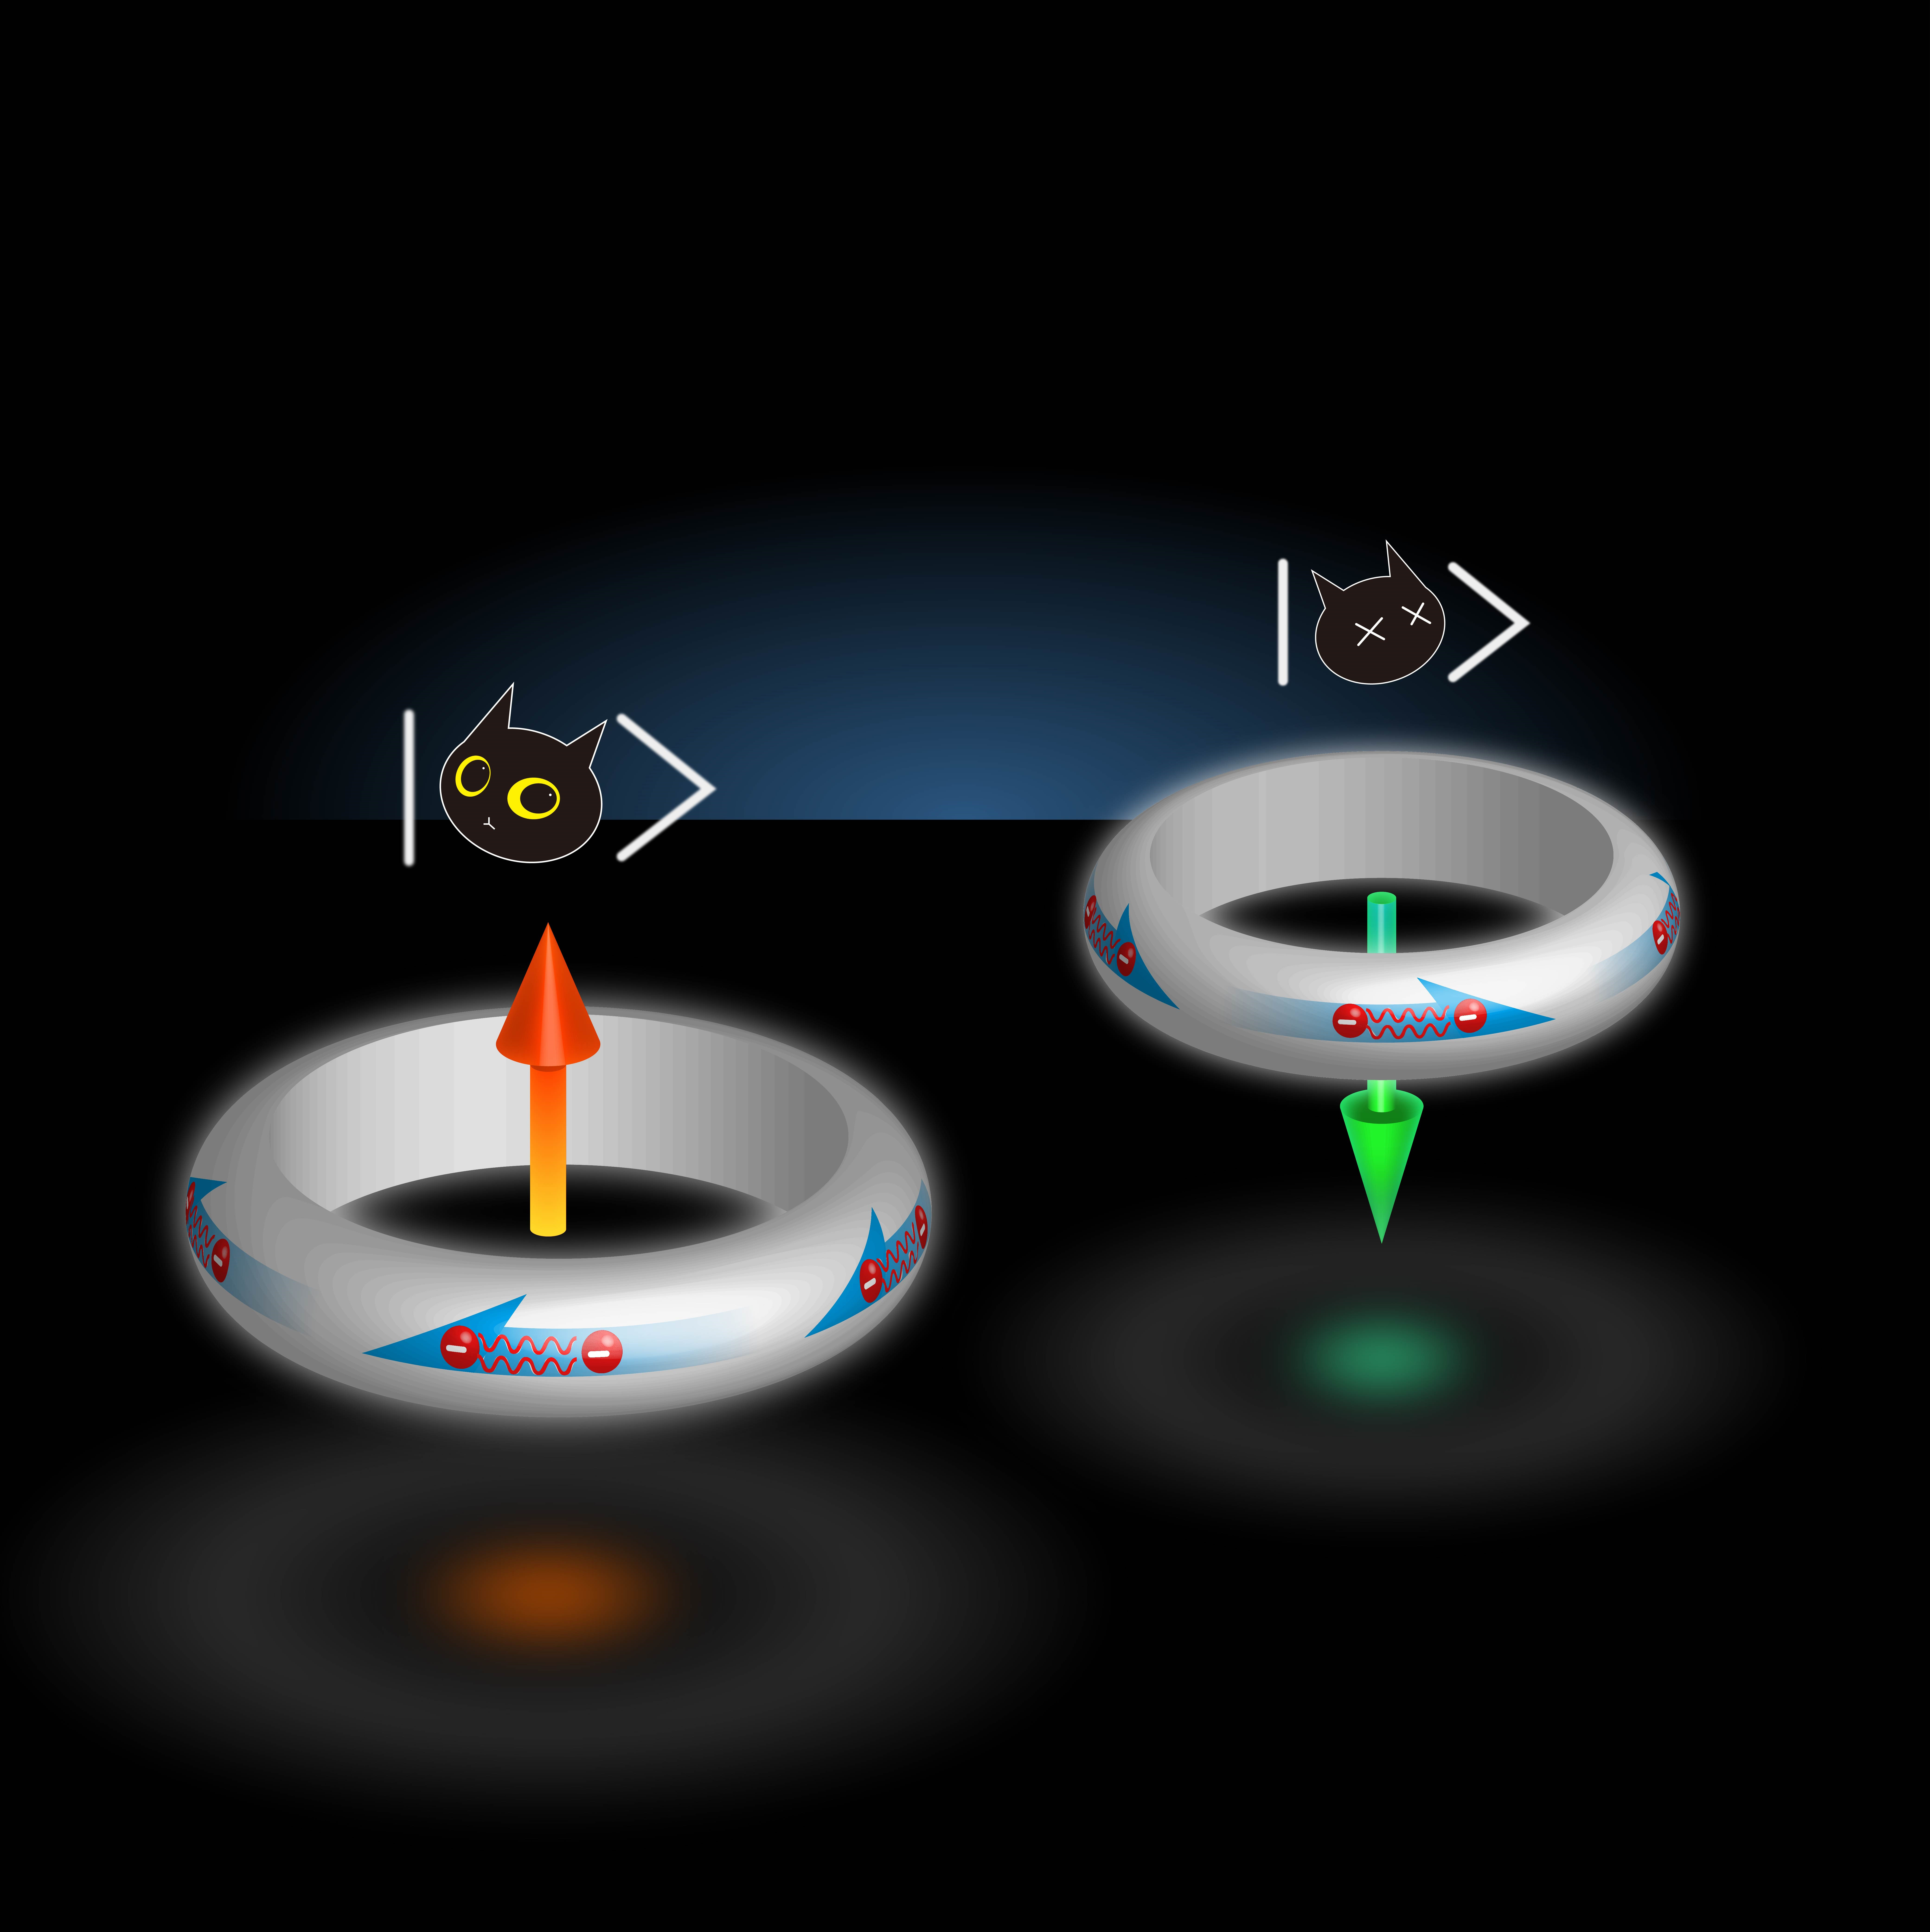 A flux qubit, a ring having electric current flowing clockwise and counterclockwise simultaneously with an external field represented as white rings with arrows.